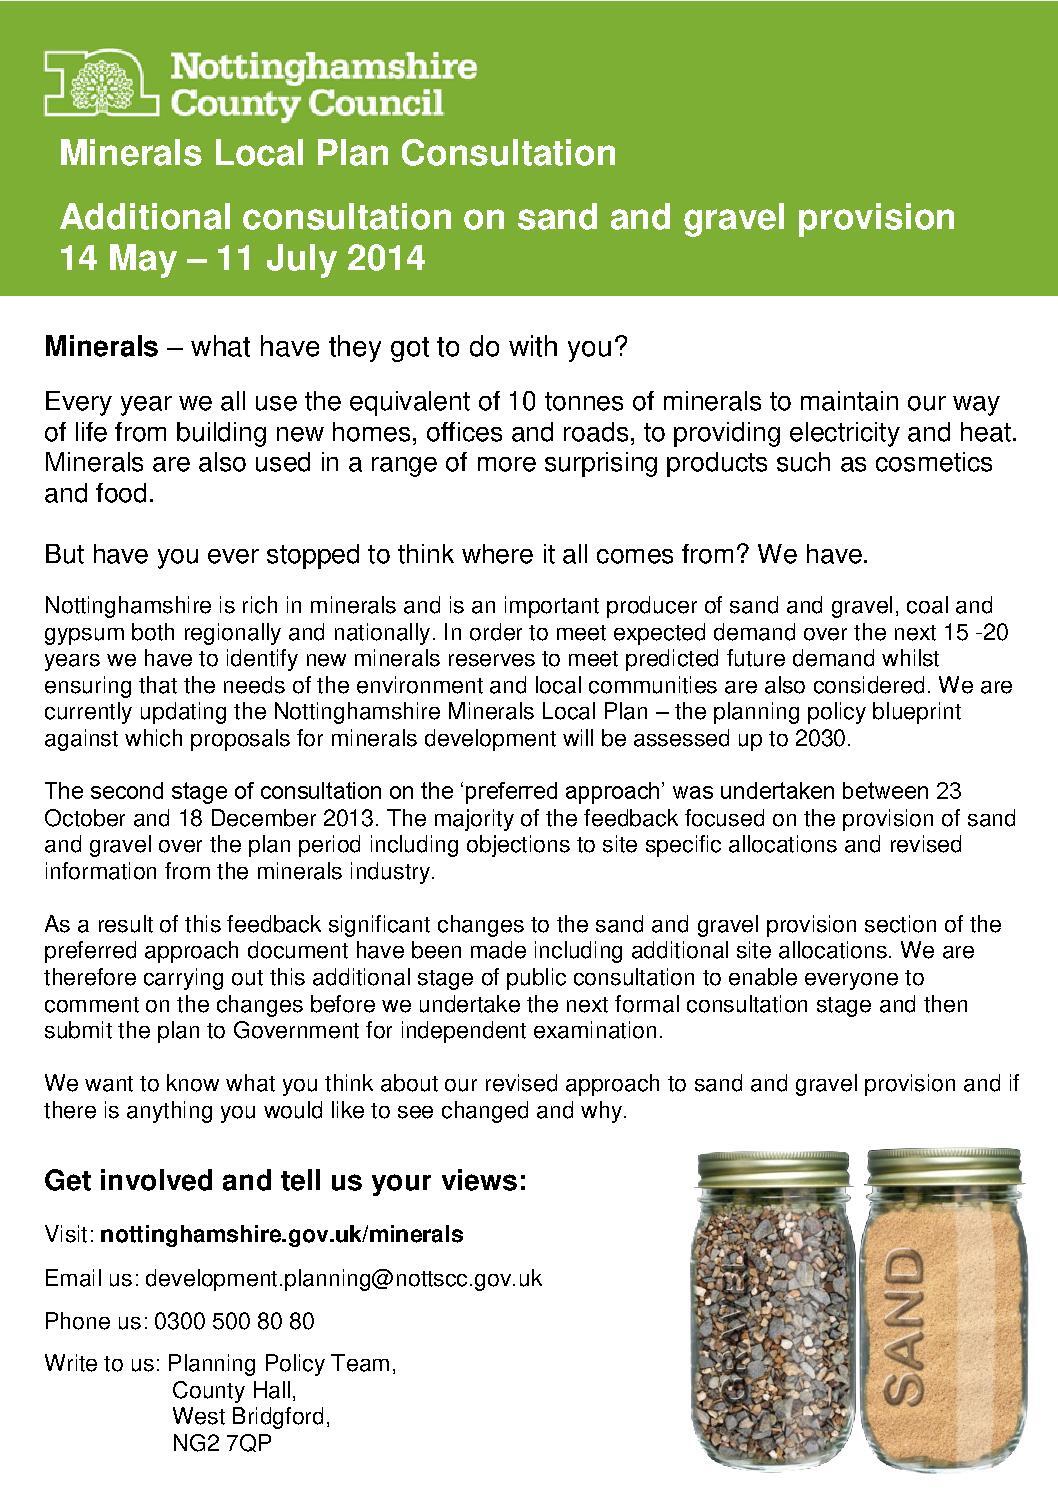 MINERALS LOCAL PLAN CONSULTATION 14 MAY - 11 JULY 2014